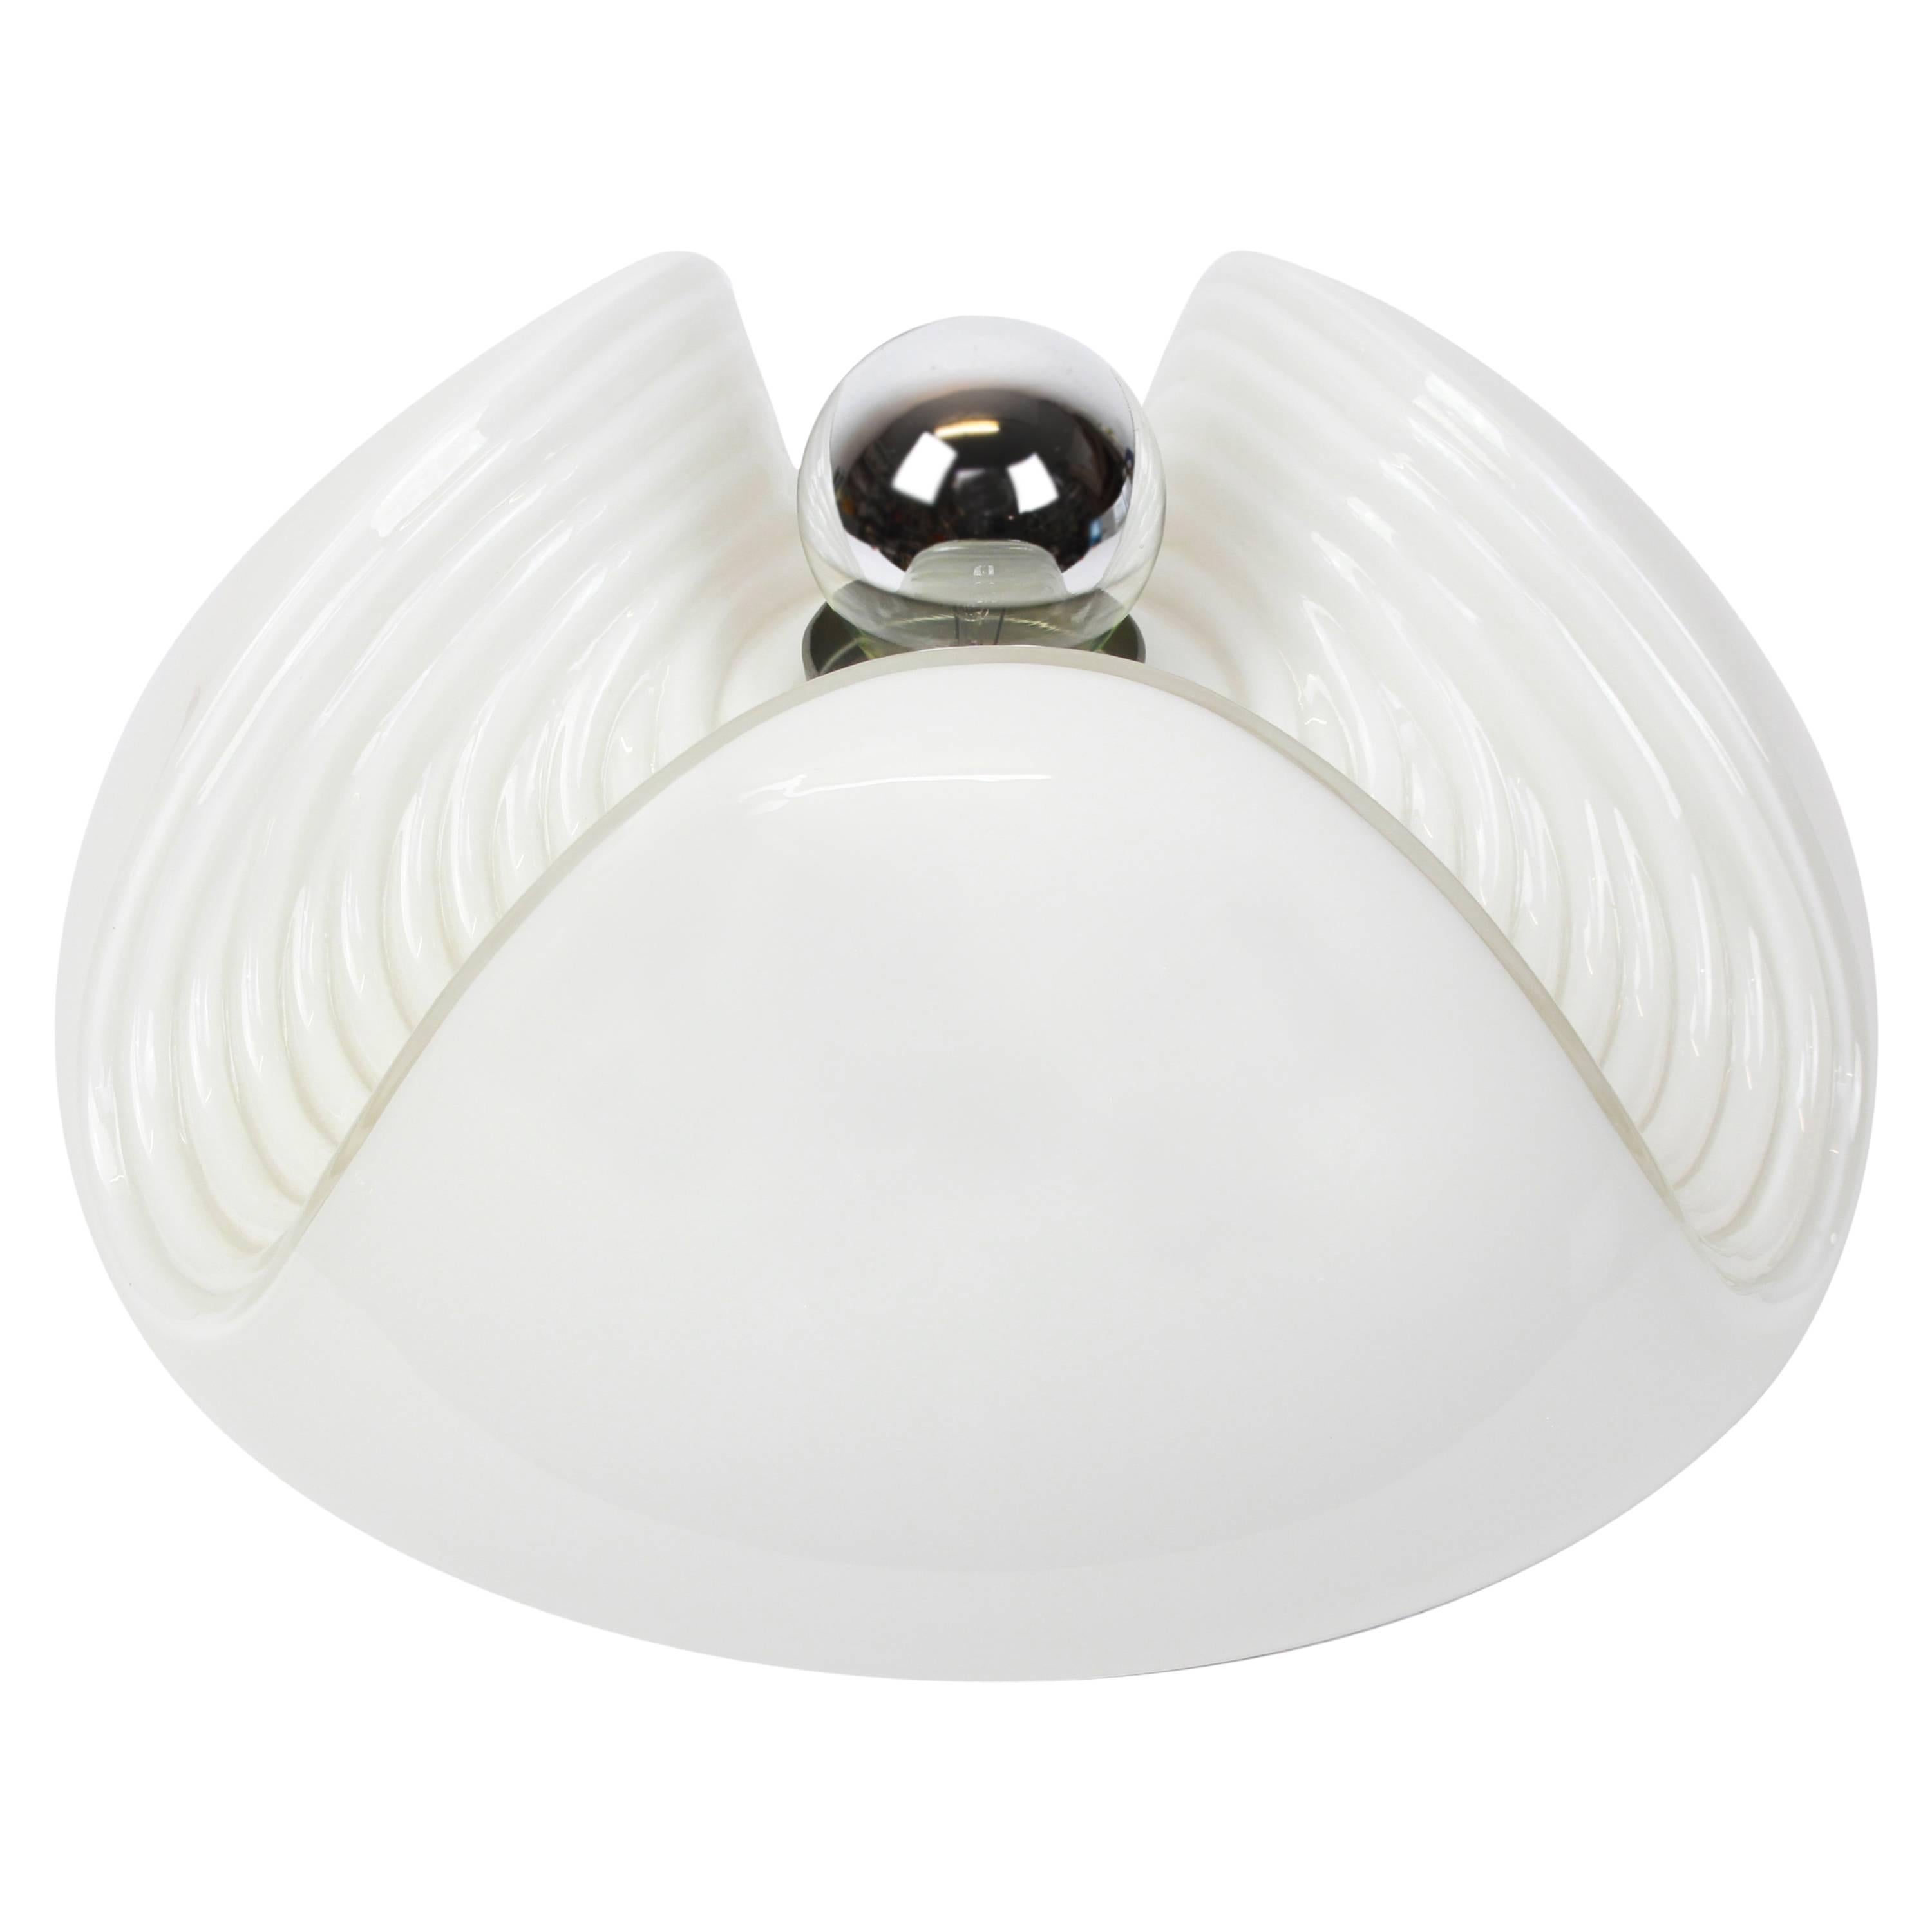 A special round biomorphic white glass wall sconce or flushmount designed by Koch & Lowy for Peill & Putzler, manufactured in Germany, circa 1970s.

High quality and in very good condition. Cleaned, well-wired and ready to use.

Each fixture